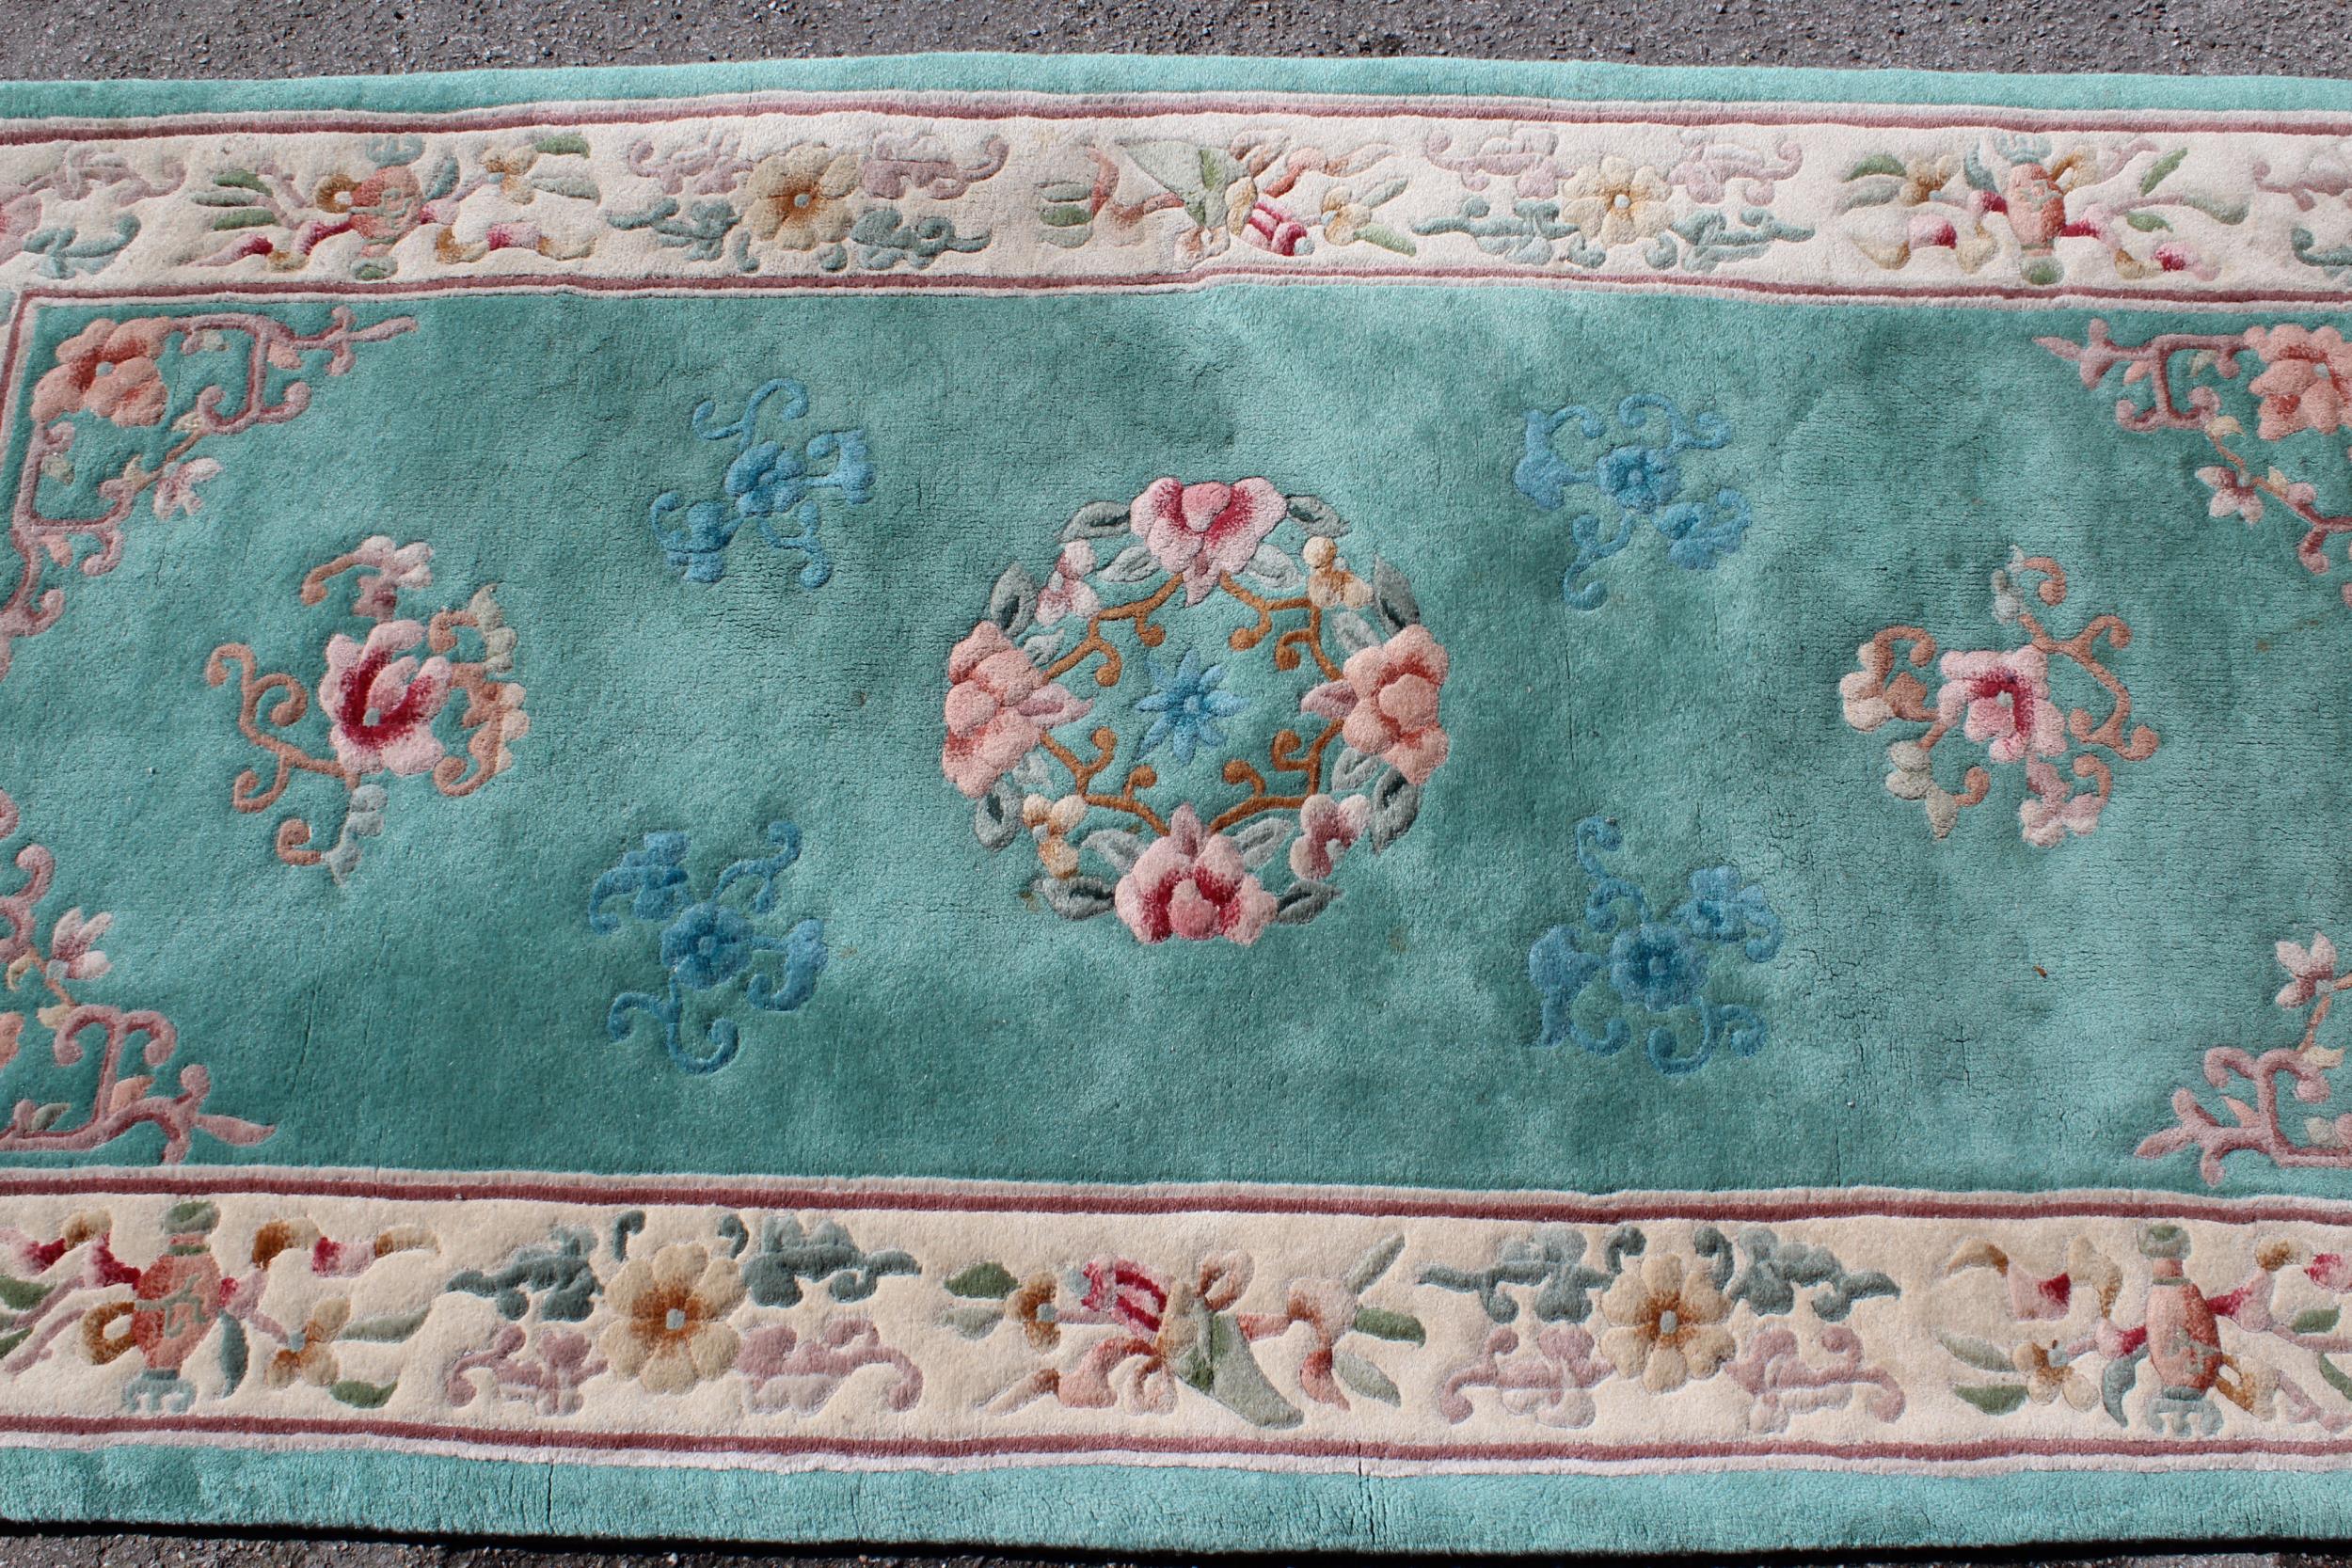 Modern rectangular Chinese rug with all-over floral design and borders on a green ground, 93cms x